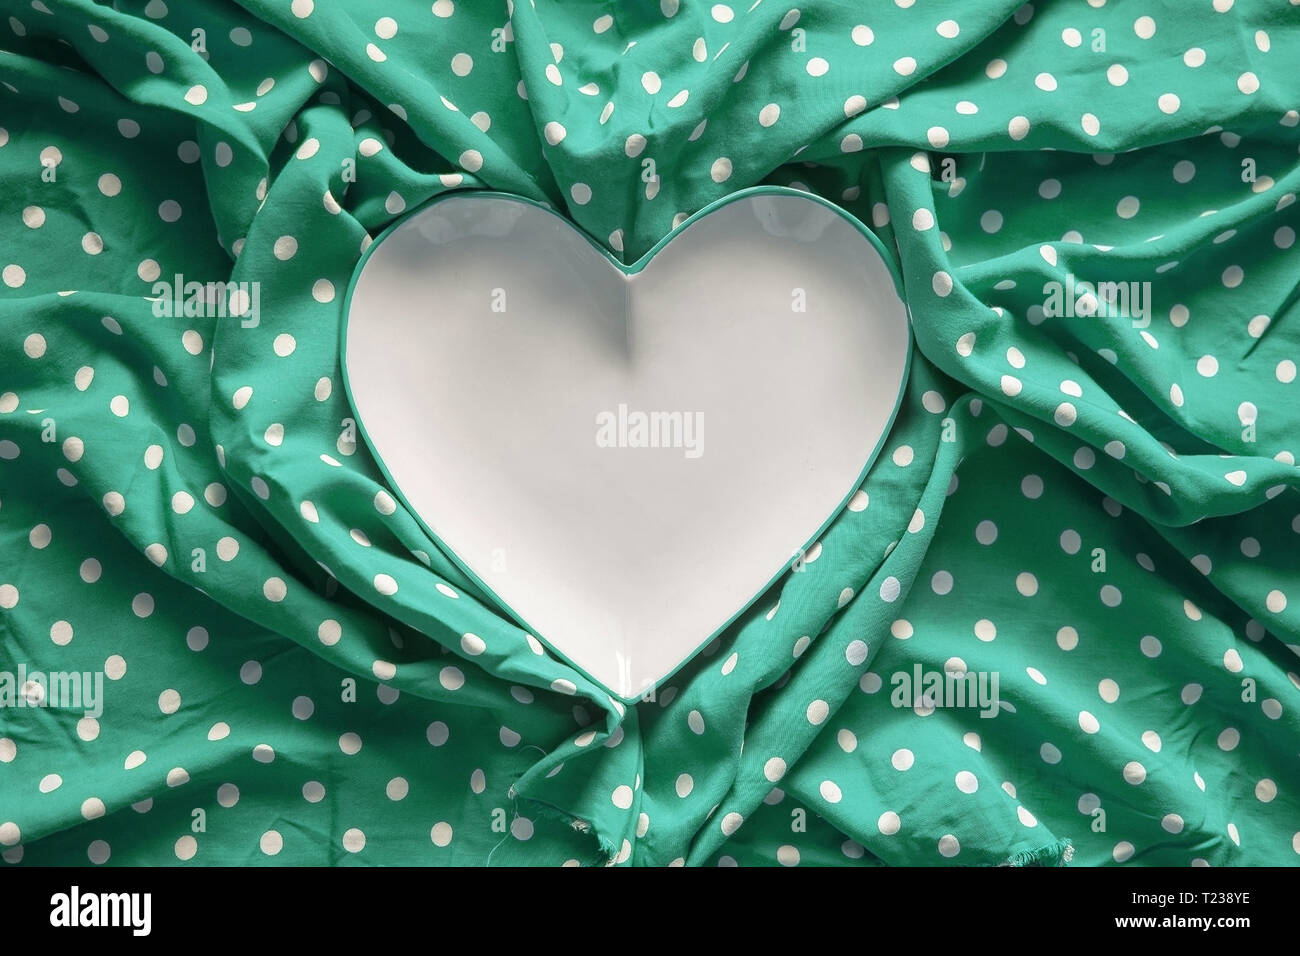 Stoneware heart shaped plate with emerald green edge on green and white polka dot printed fabric fun romantic background texture. Stock Photo